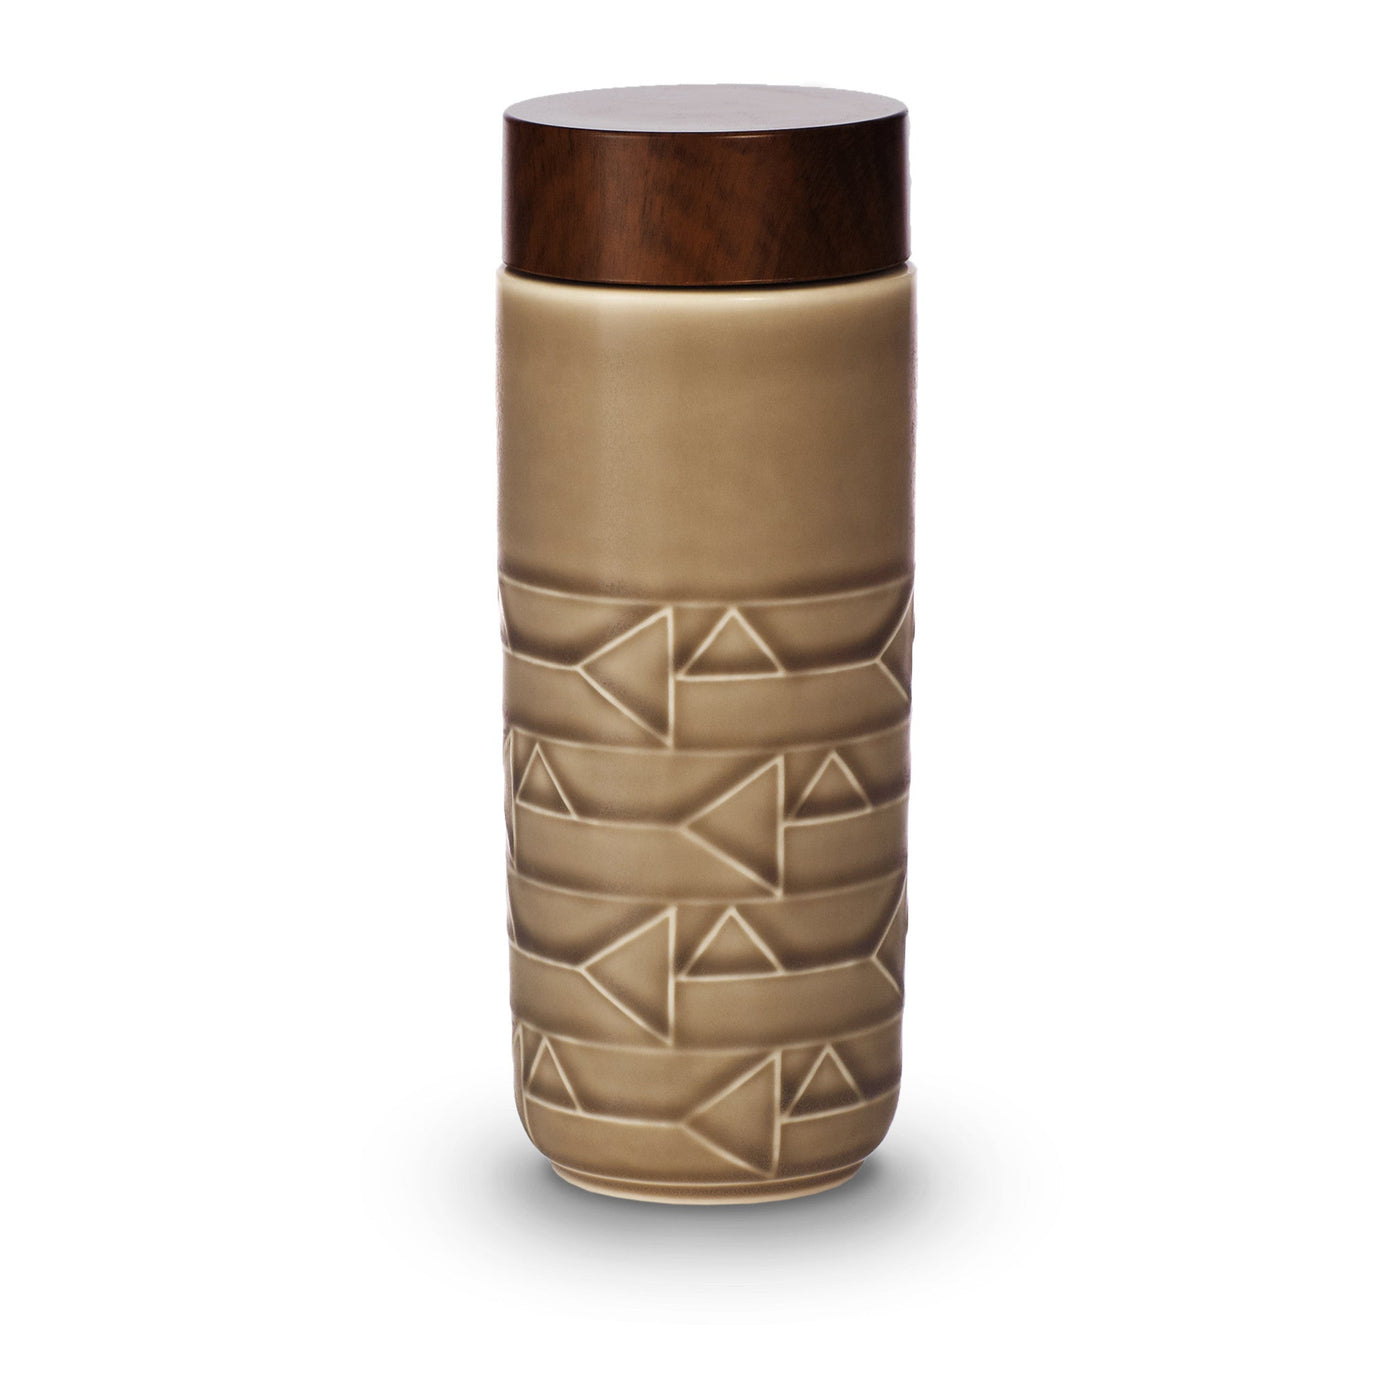 The Alchemical Signs Tumbler by ACERA LIVEN